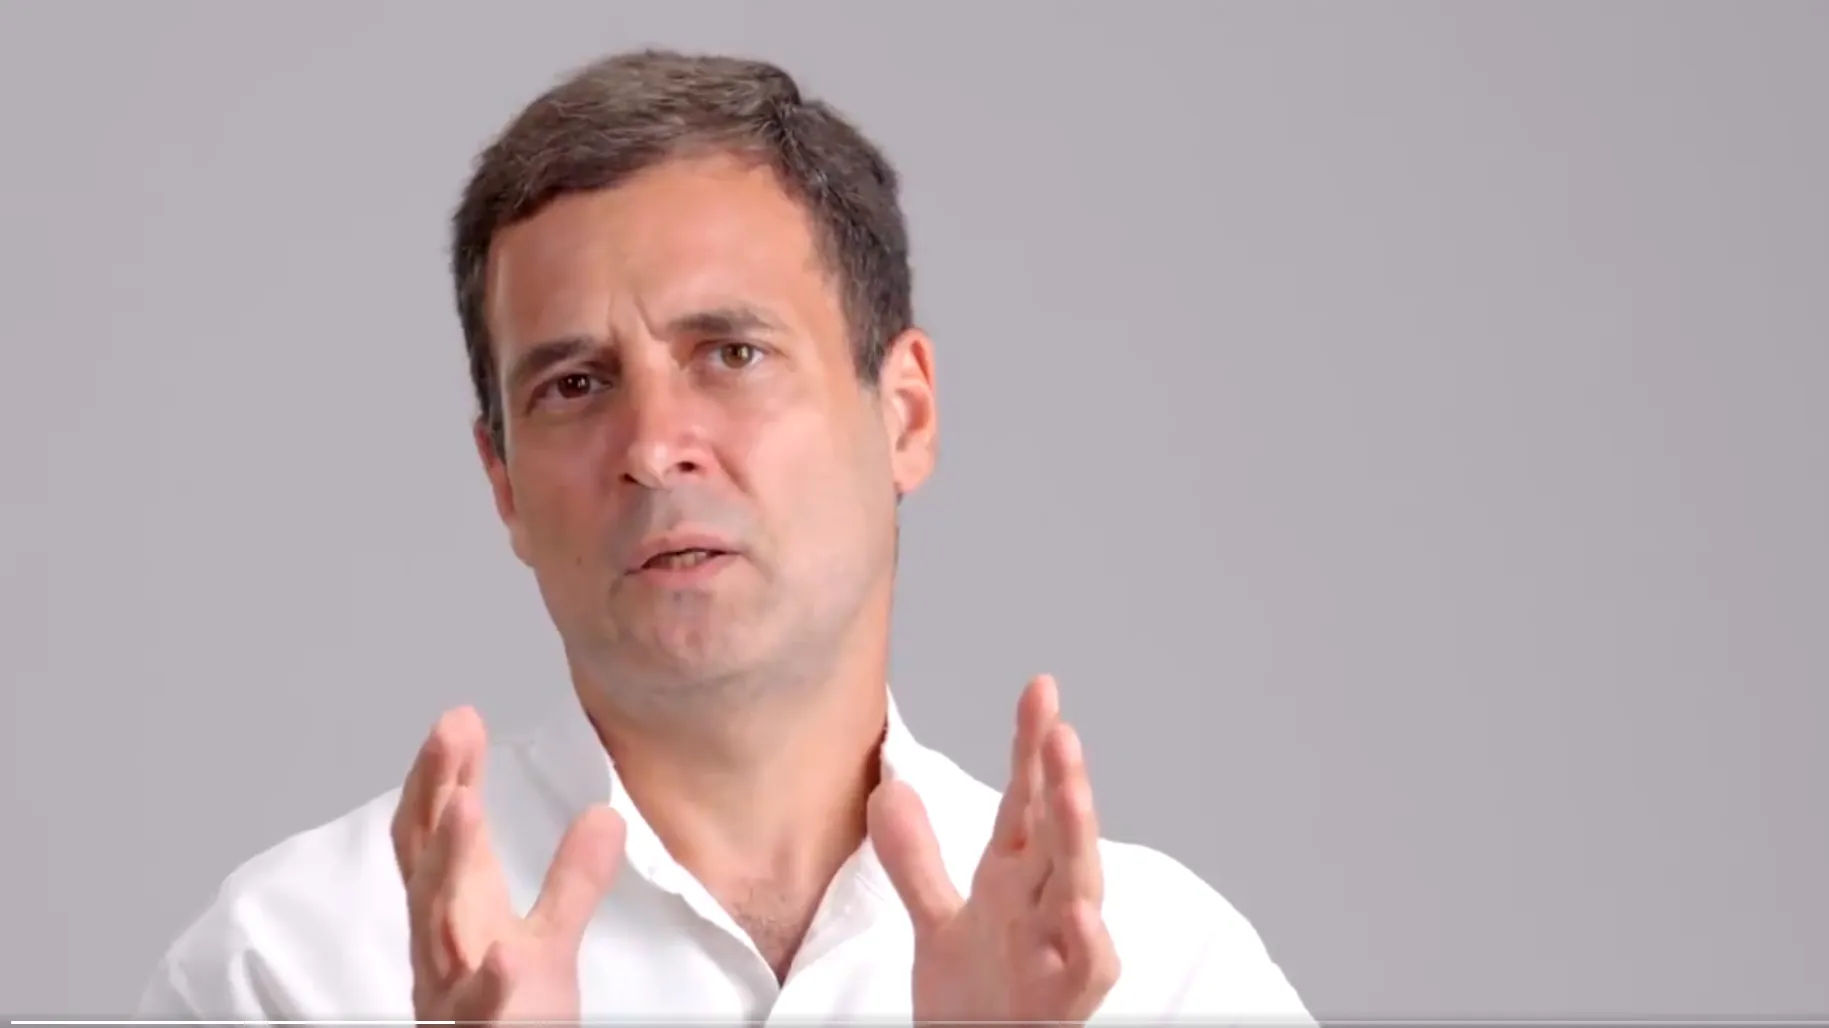 Here’s what Rahul Gandhi would do if he becomes India’s prime minister